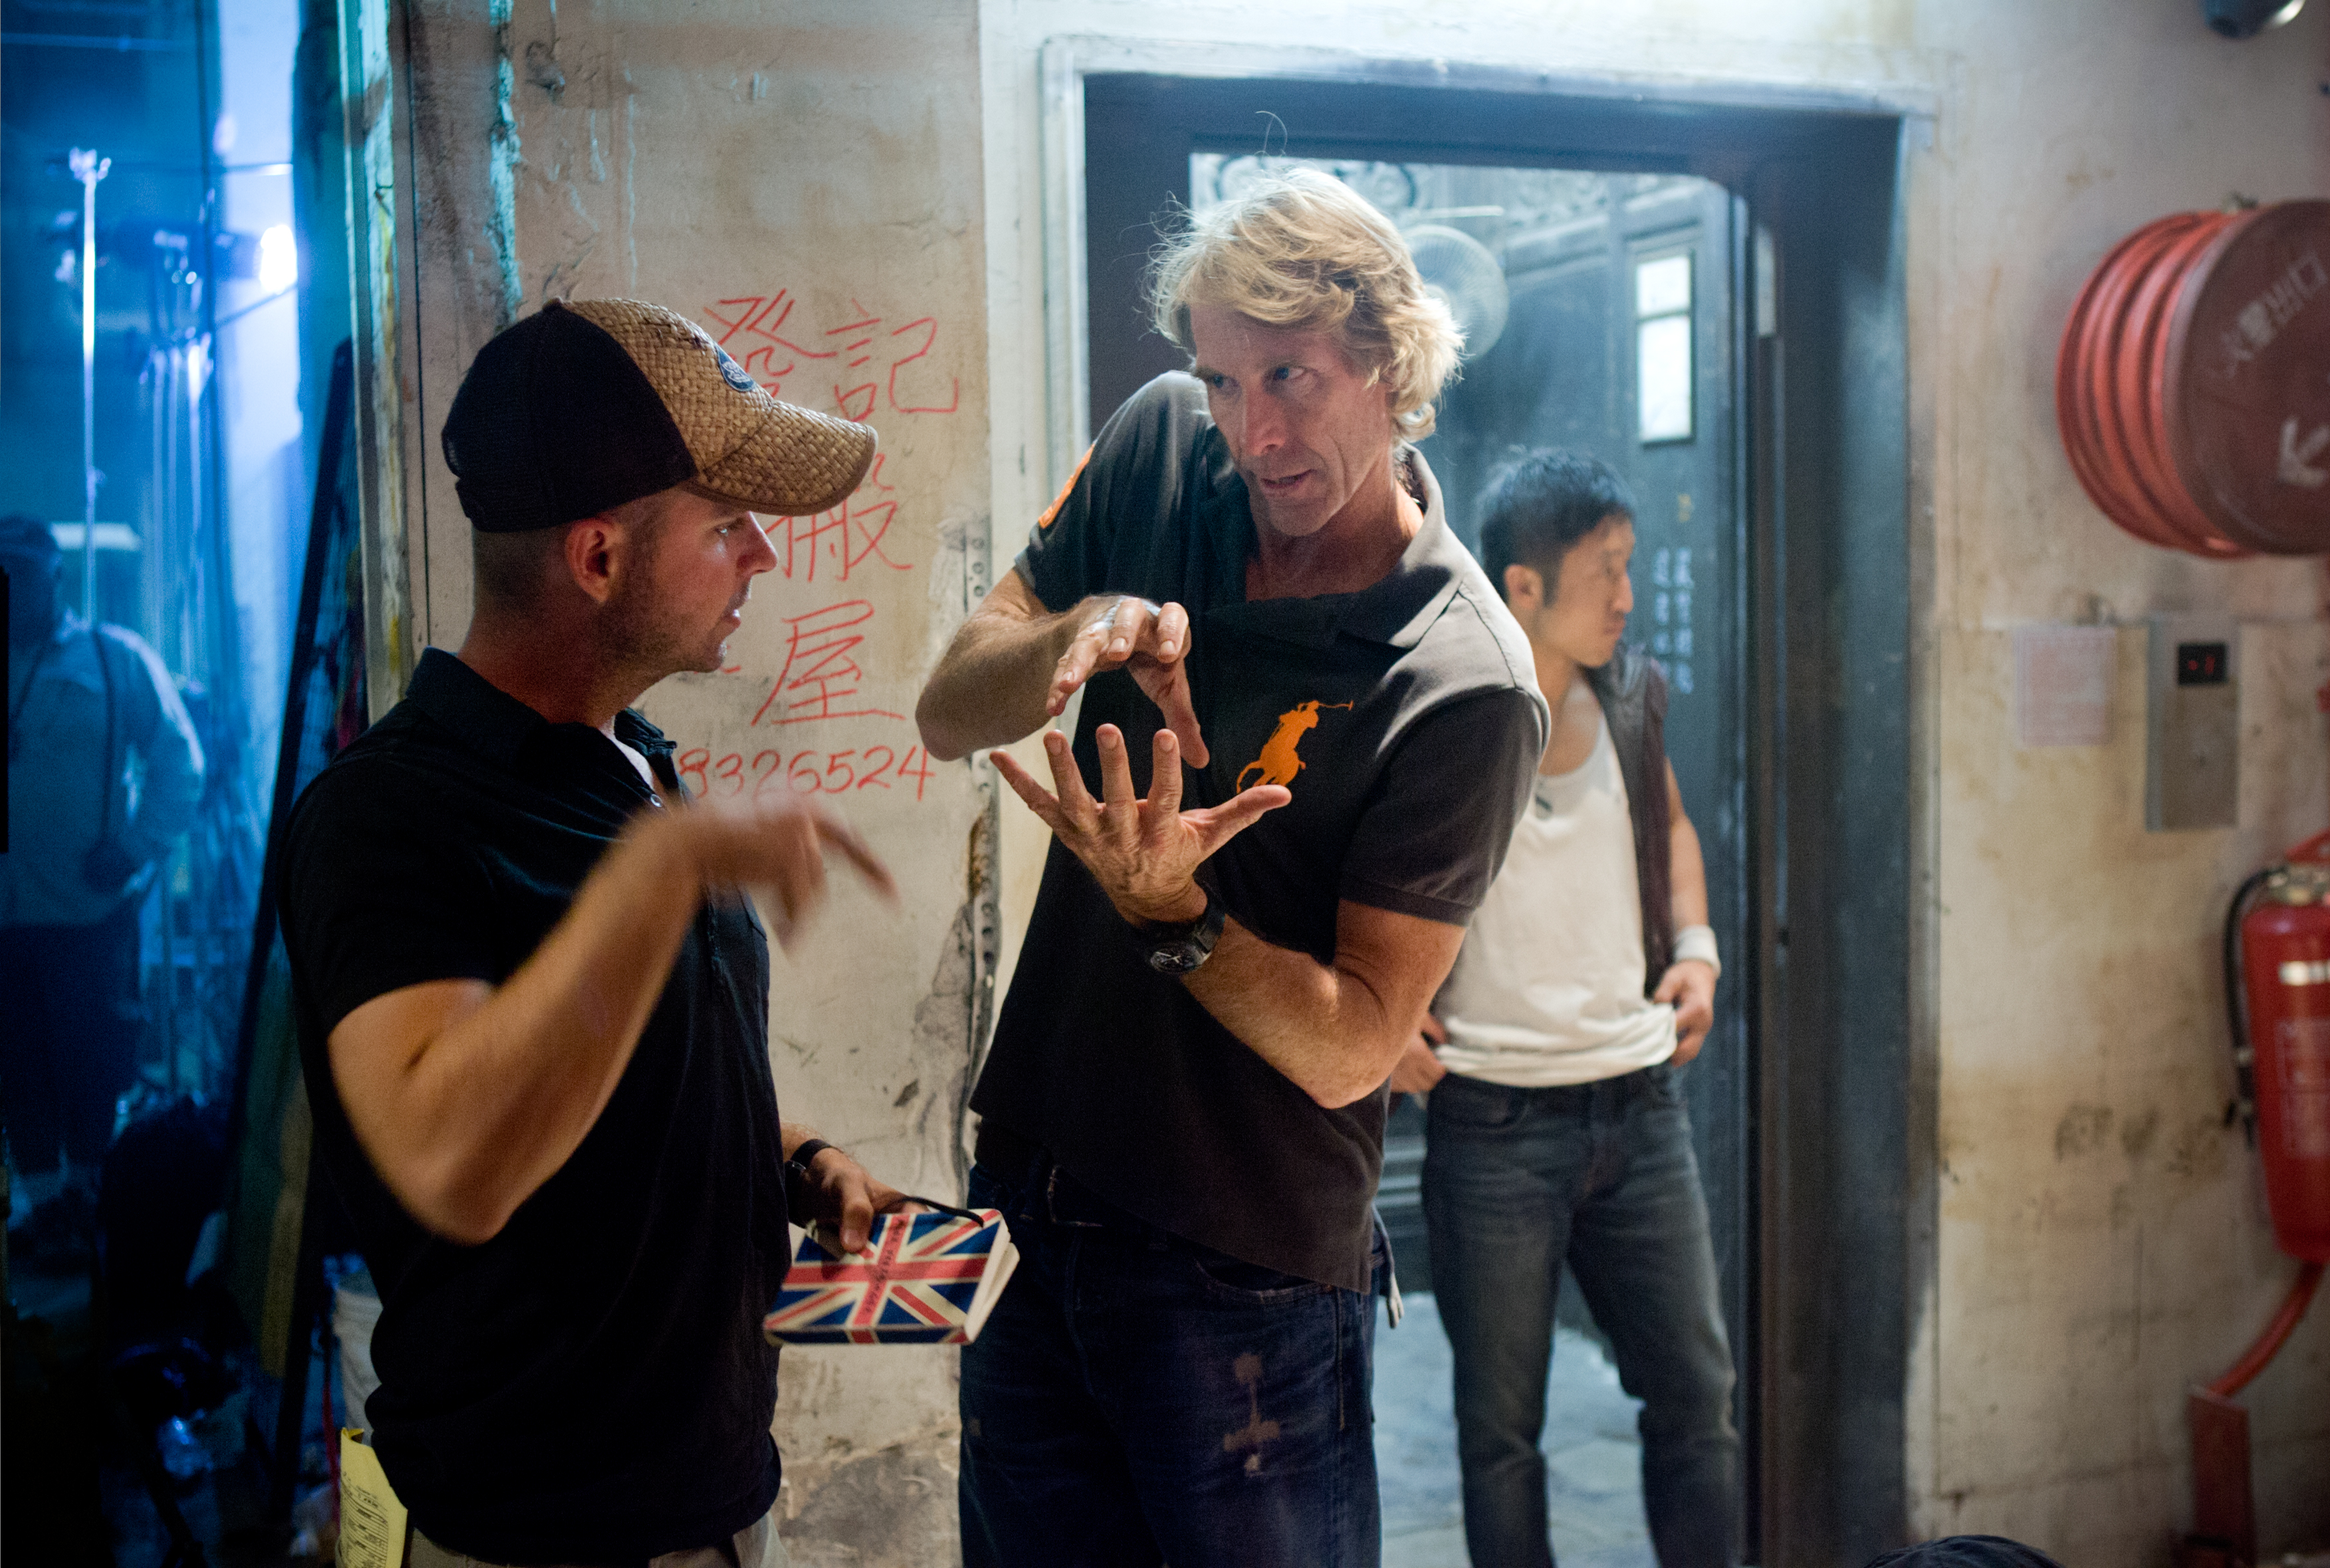 Mark Freiburger & Michael Bay on set of TRANSFORMERS: AGE OF EXTINCTION